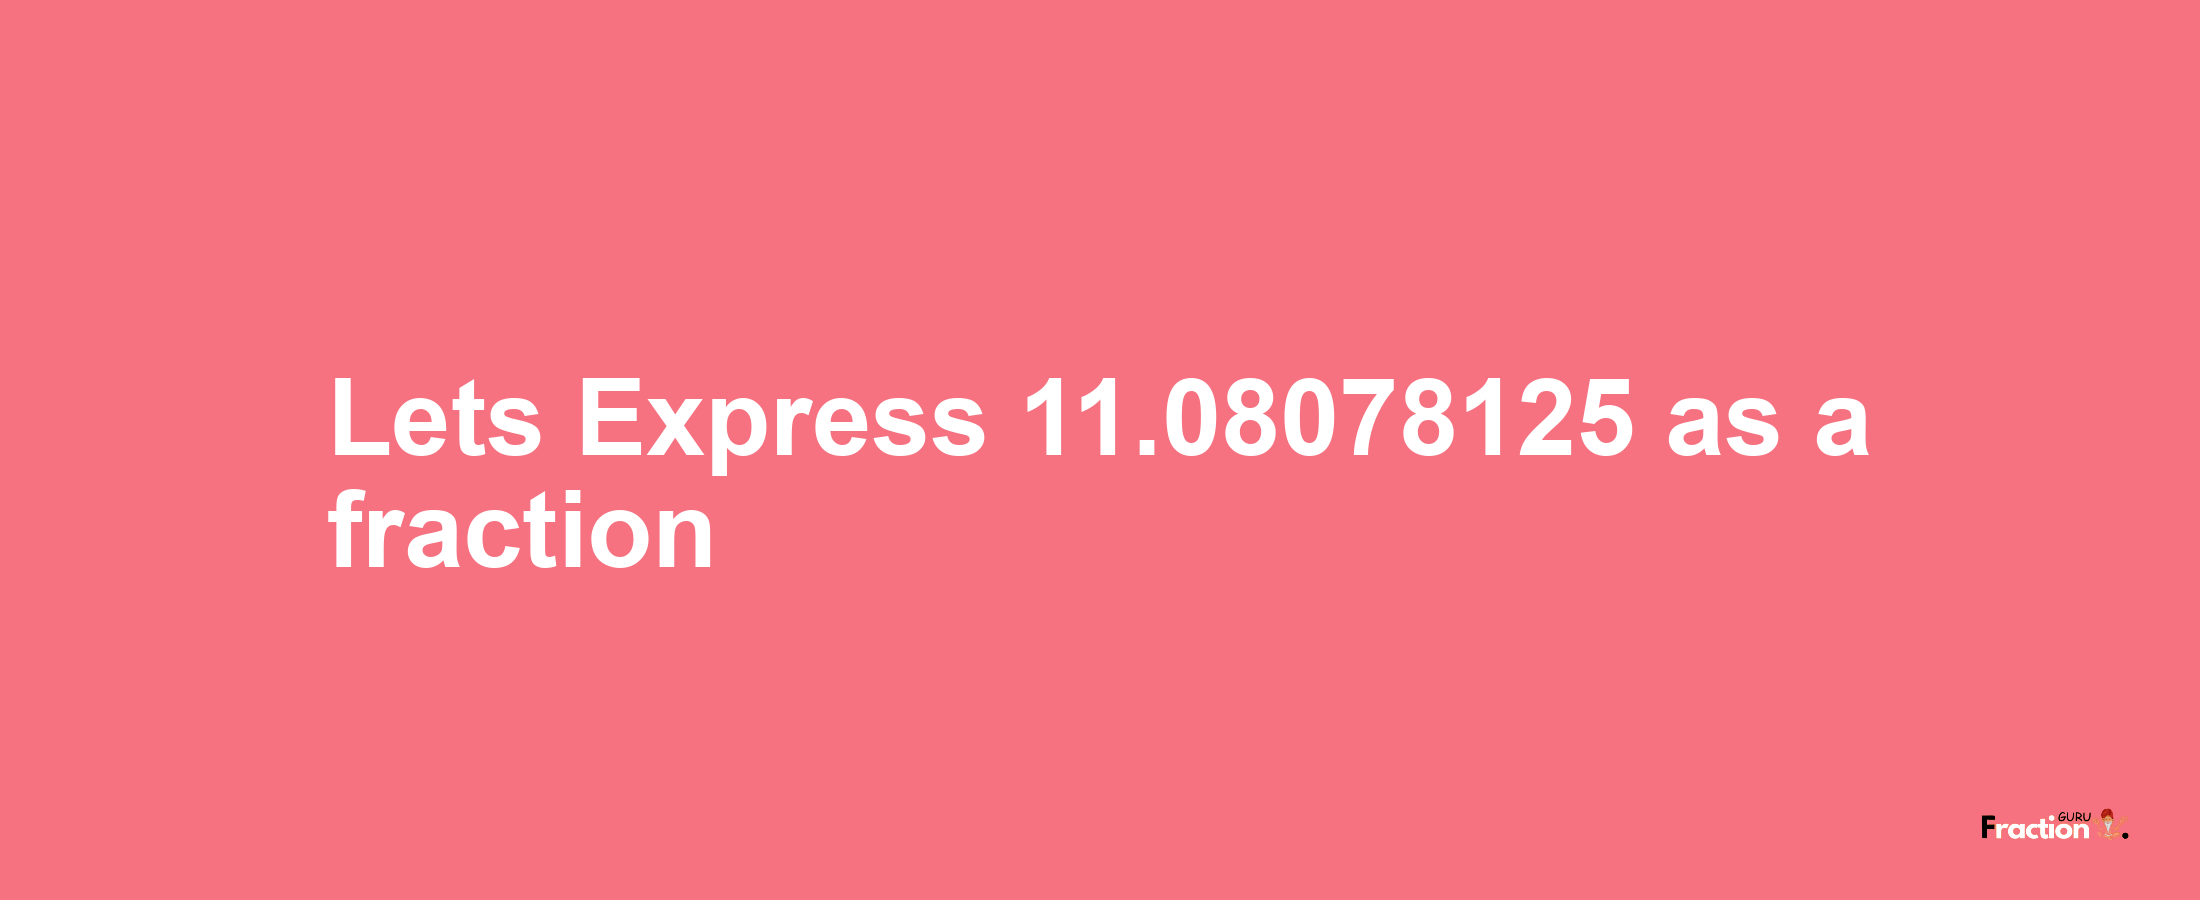 Lets Express 11.08078125 as afraction